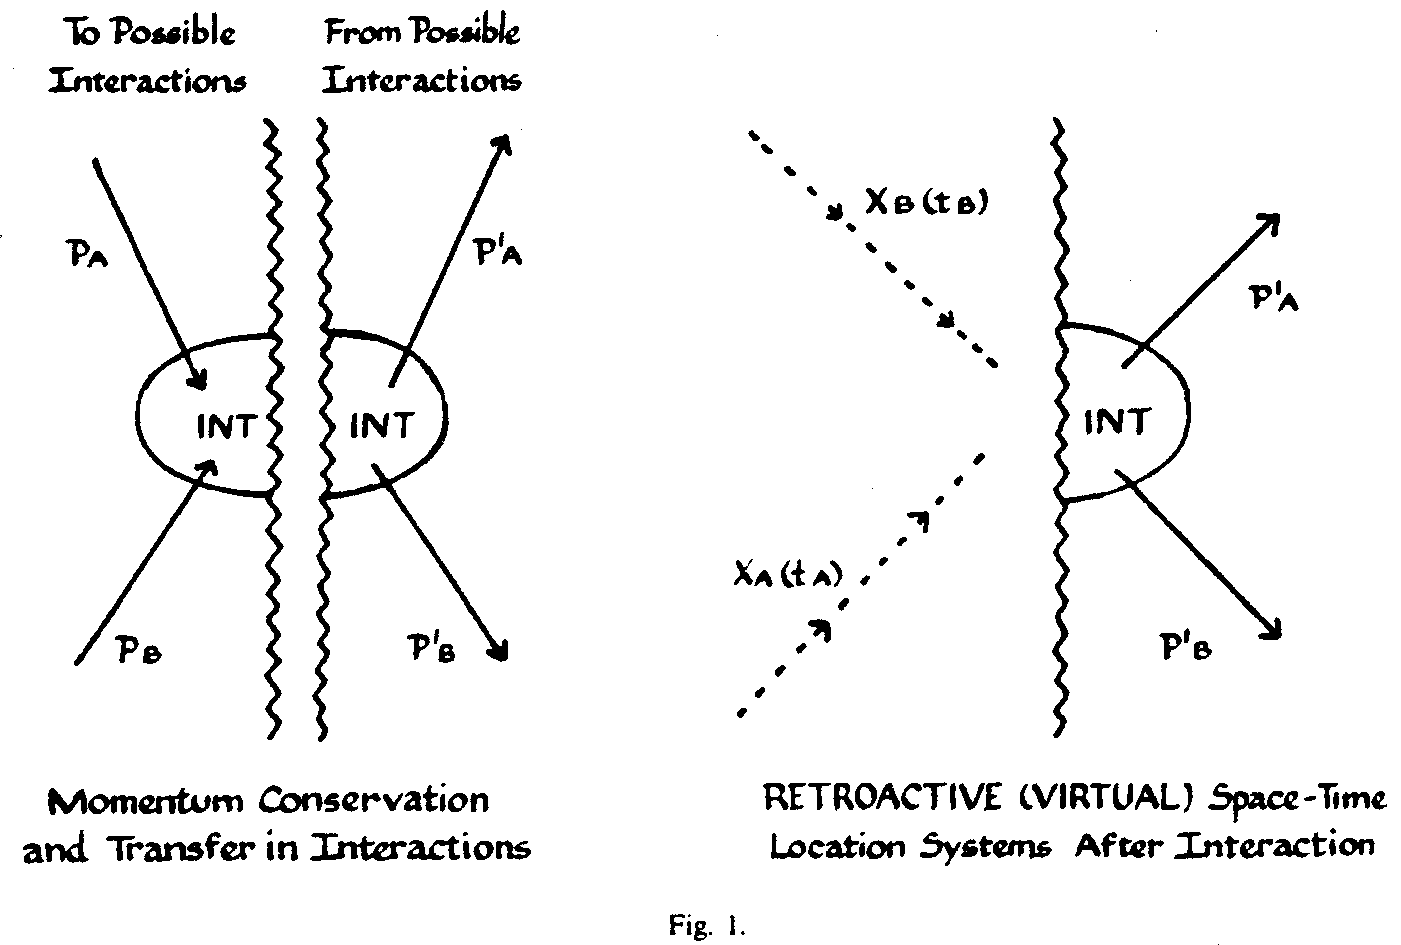 Figure 1: Image of an interaction.